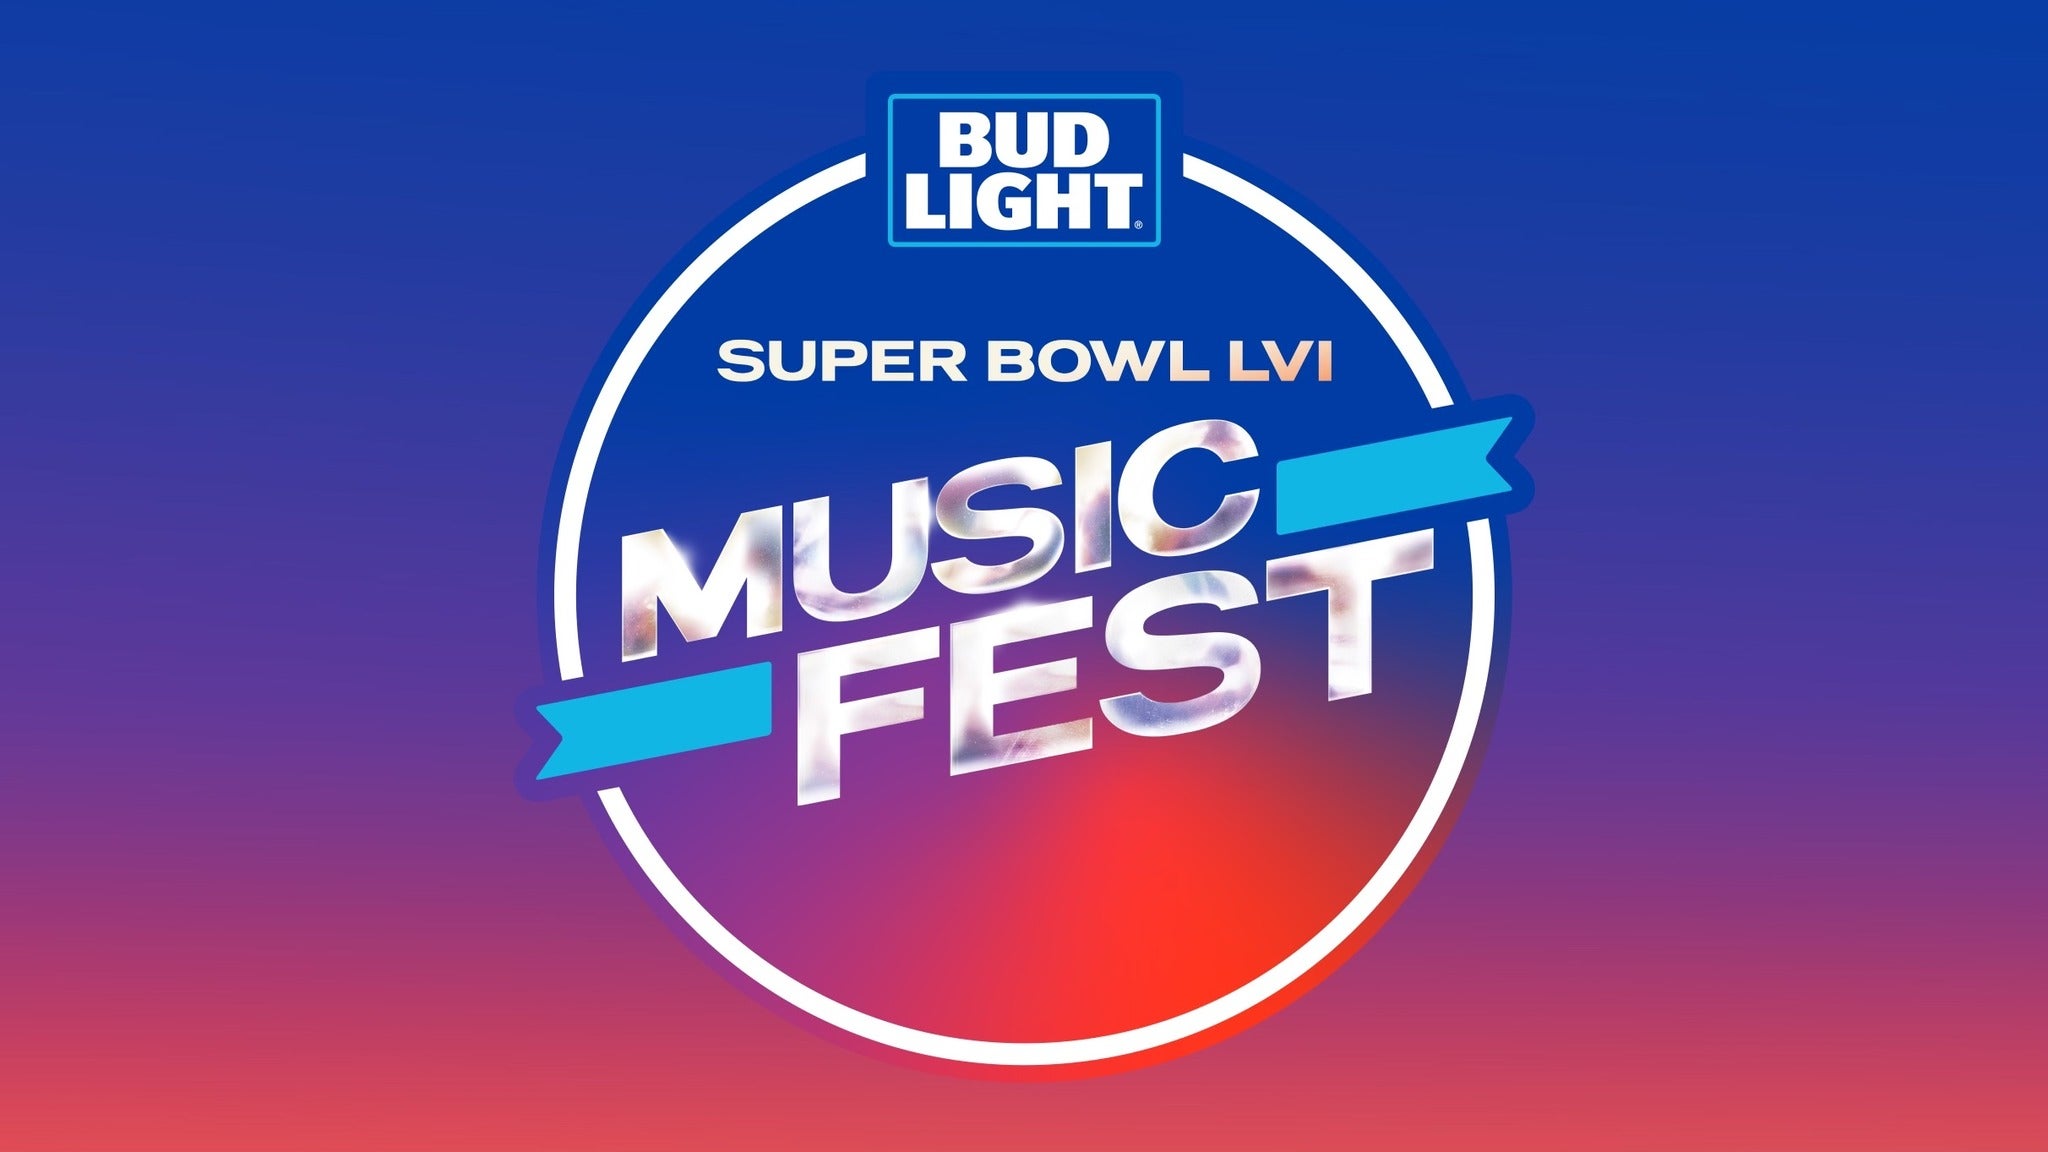 Bud Light Super Bowl Music Fest:  Green Day & Miley Cyrus in Los Angeles promo photo for 1 3PM presale offer code